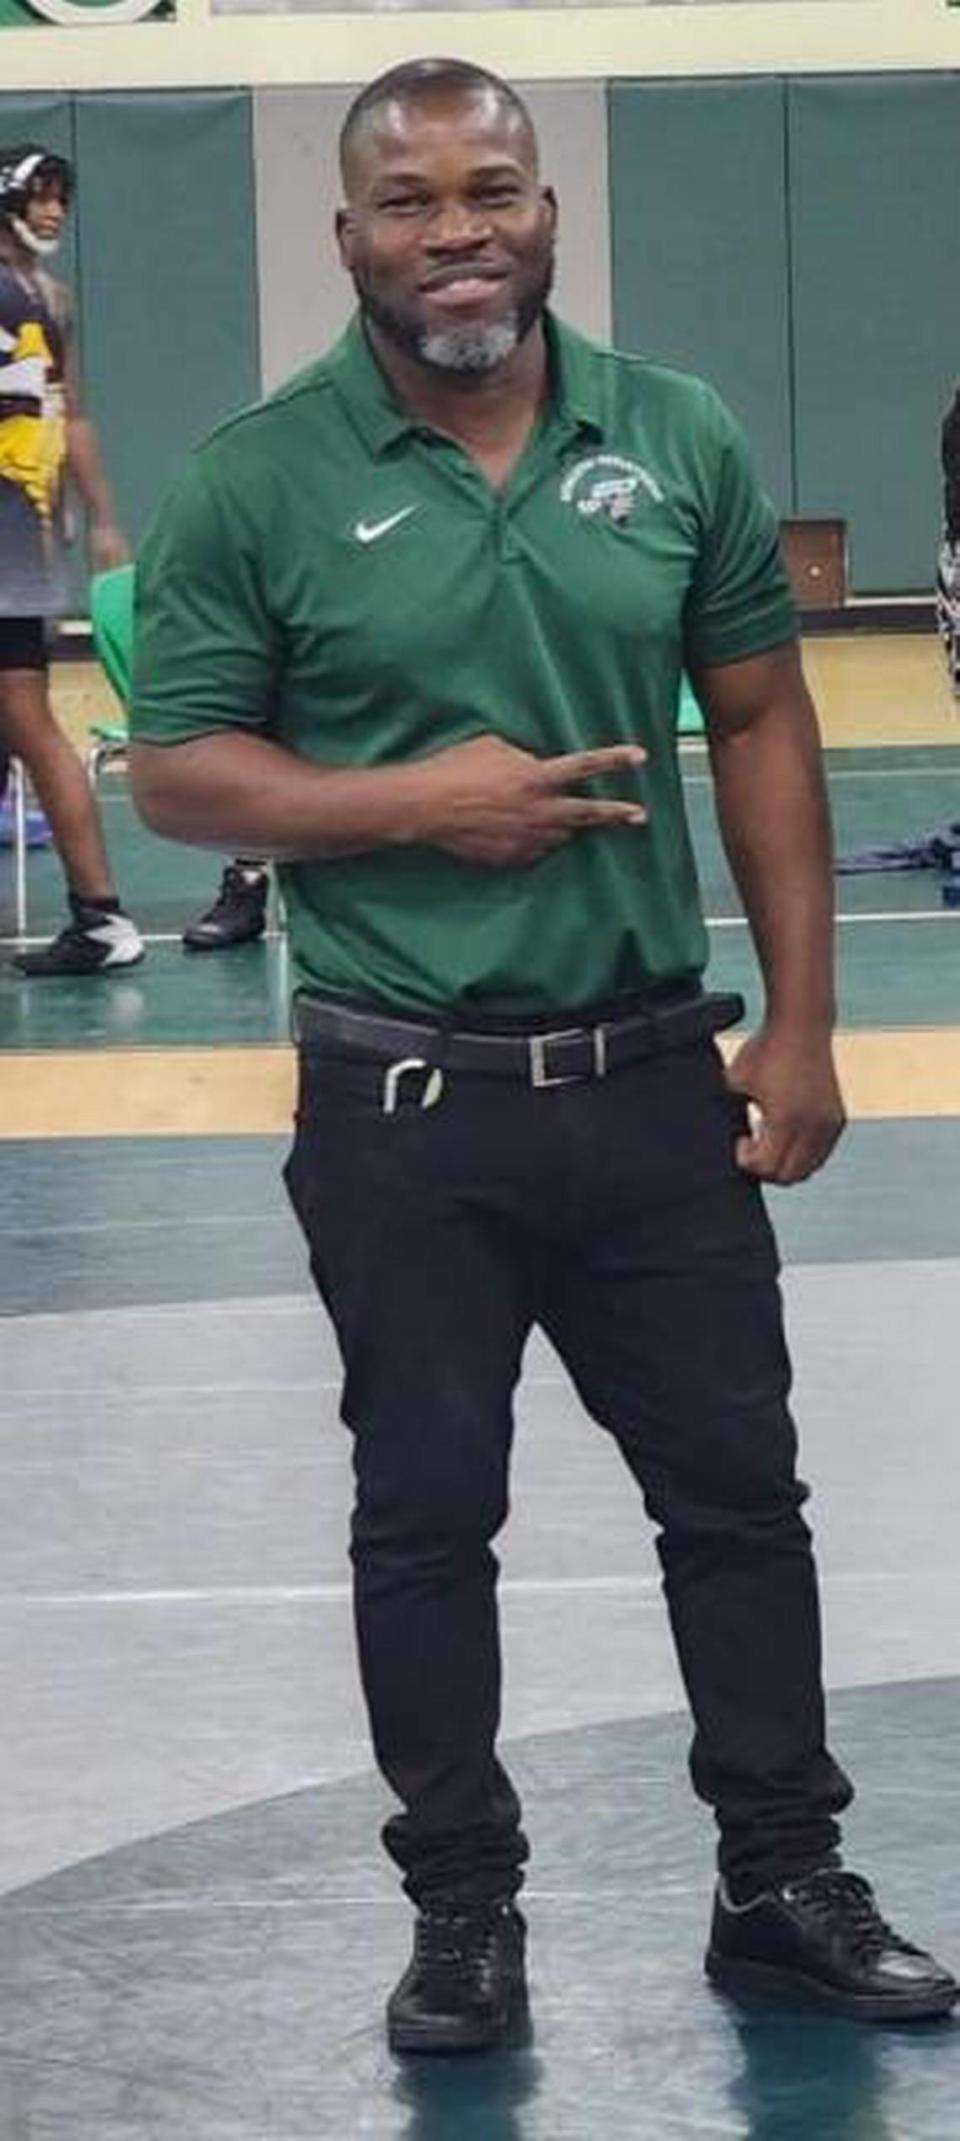 North Miami’s John Severe is the Miami Herald’s Girls’ Wrestling Coach of the Year.